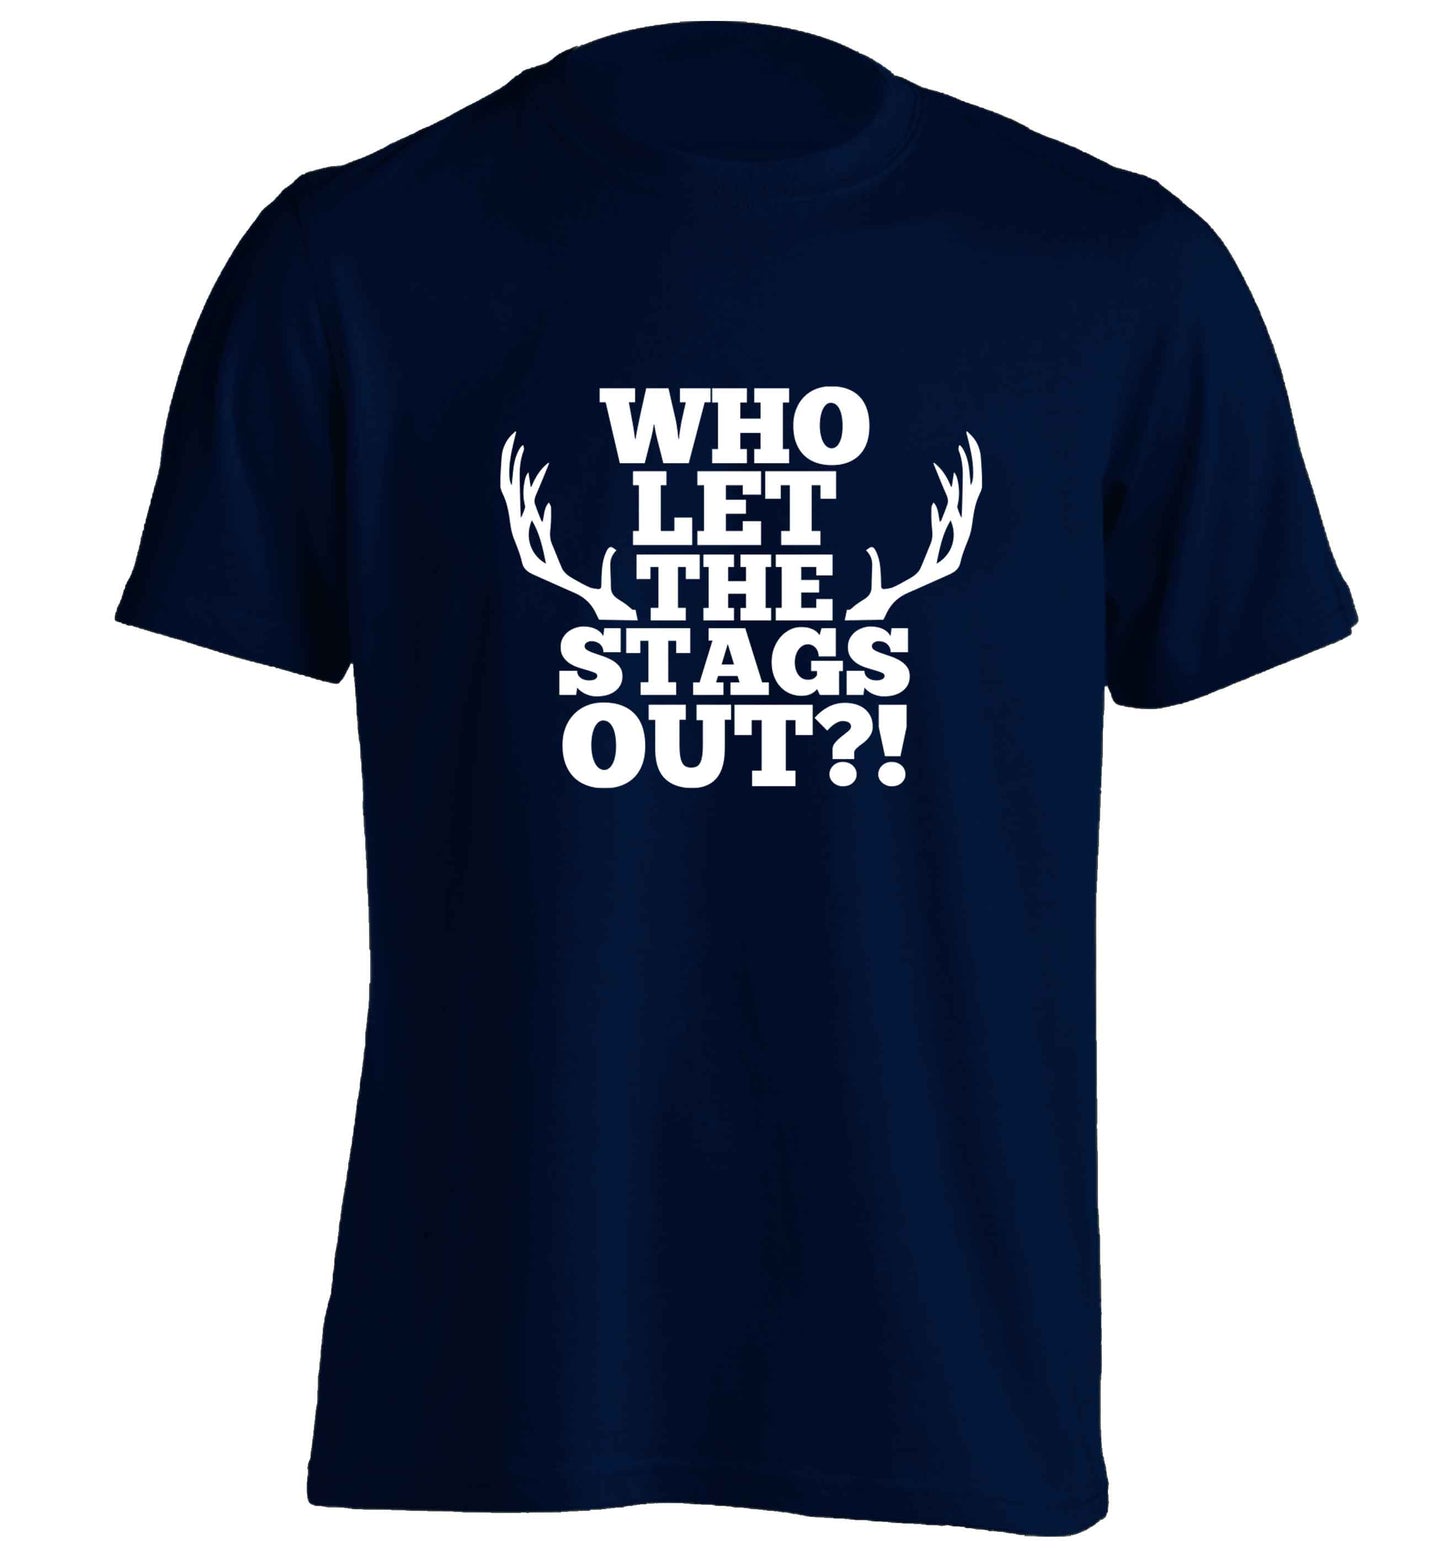 Who let the stags out adults unisex navy Tshirt 2XL